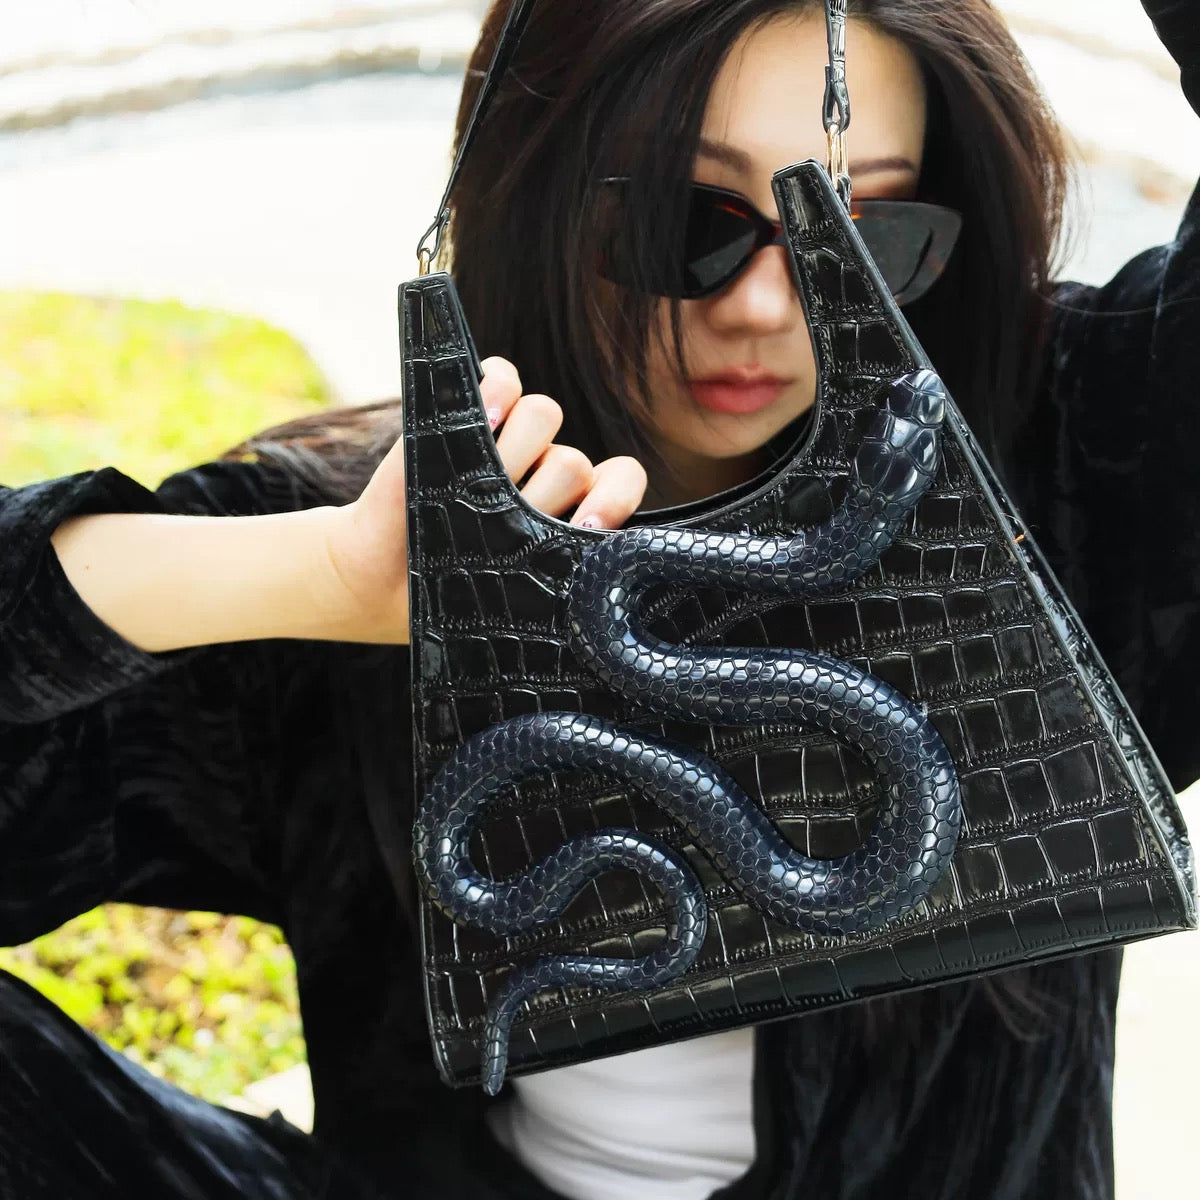 "Gothic Perfection" - Handcrafted Bags with Macabre Details 05